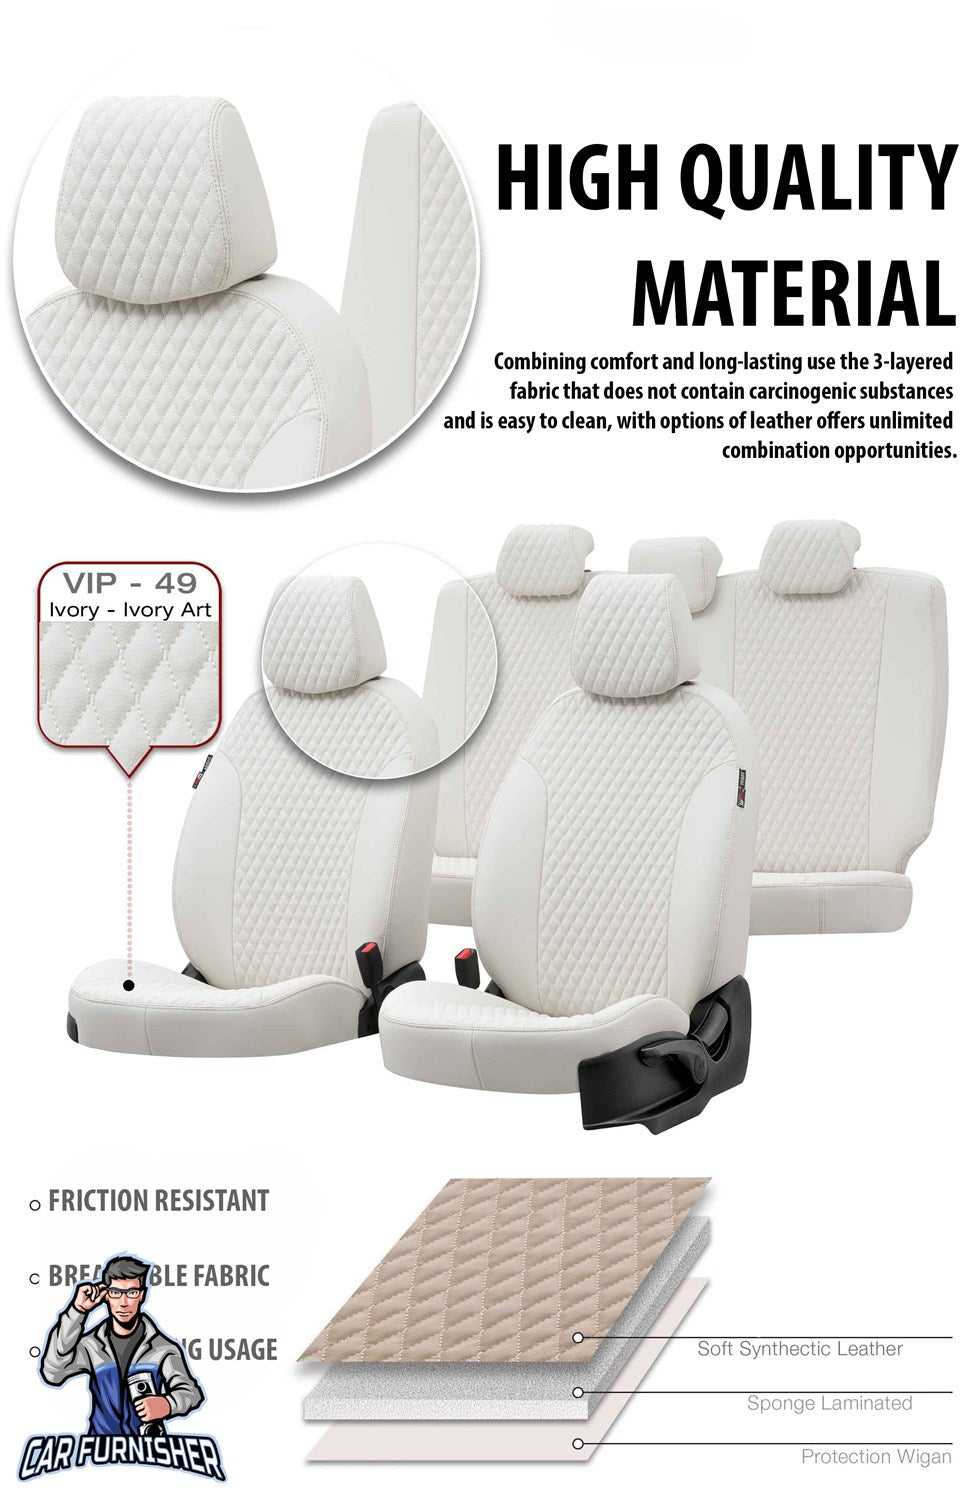 Renault Trafic Seat Covers Amsterdam Leather Design Beige Leather